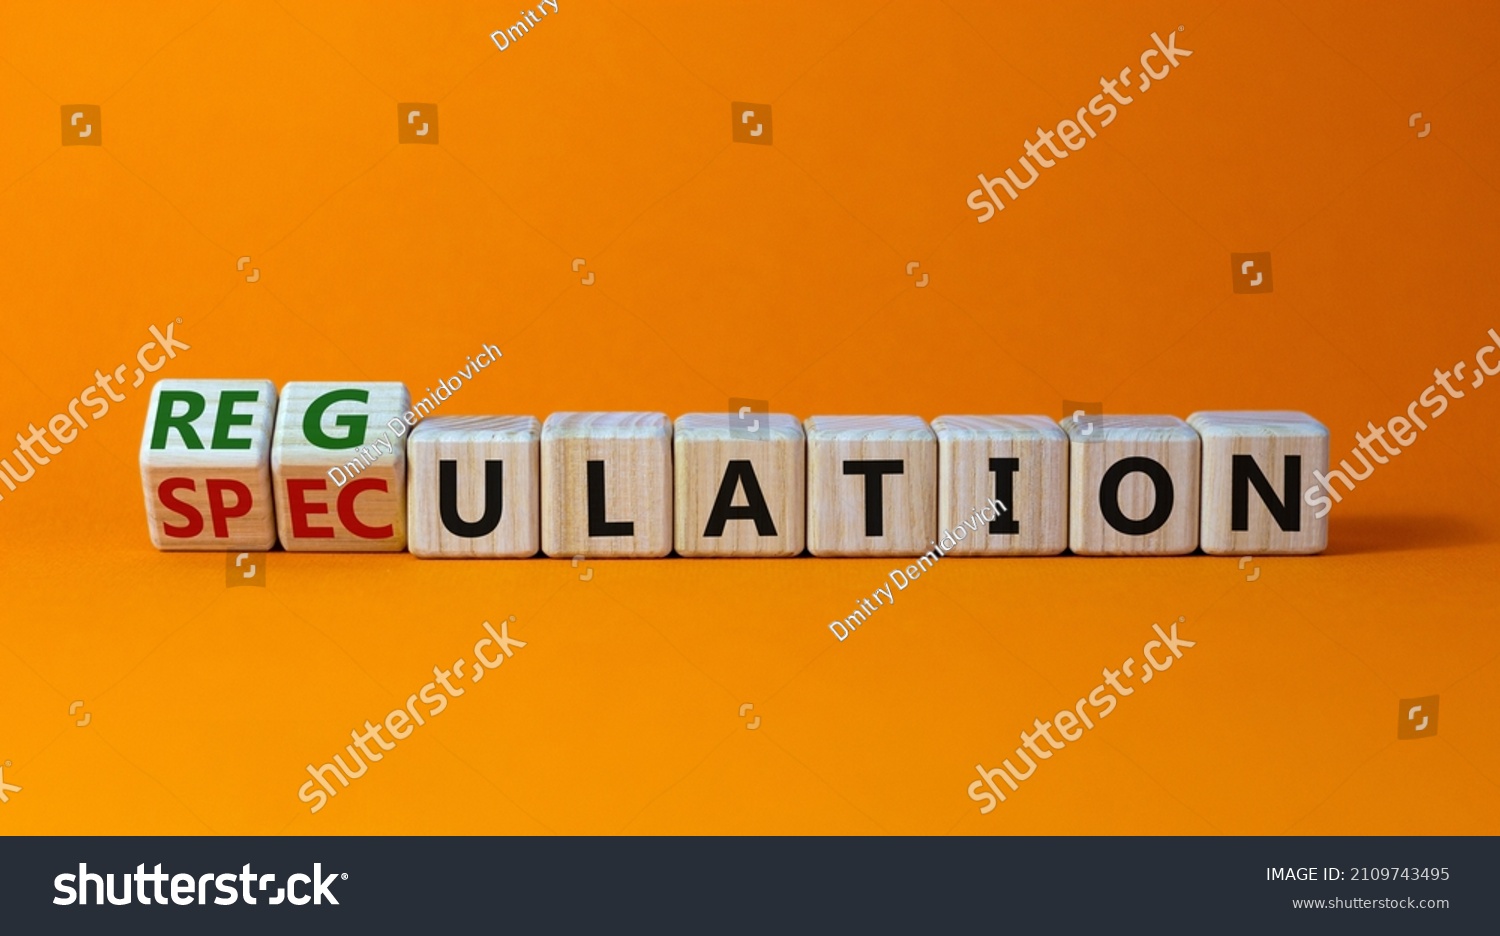 Speculation or regulation symbol. Turned cubes and changed the word speculation to regulation. Beautiful orange table, orange background, copy space. Business, speculation or regulation concept. #2109743495